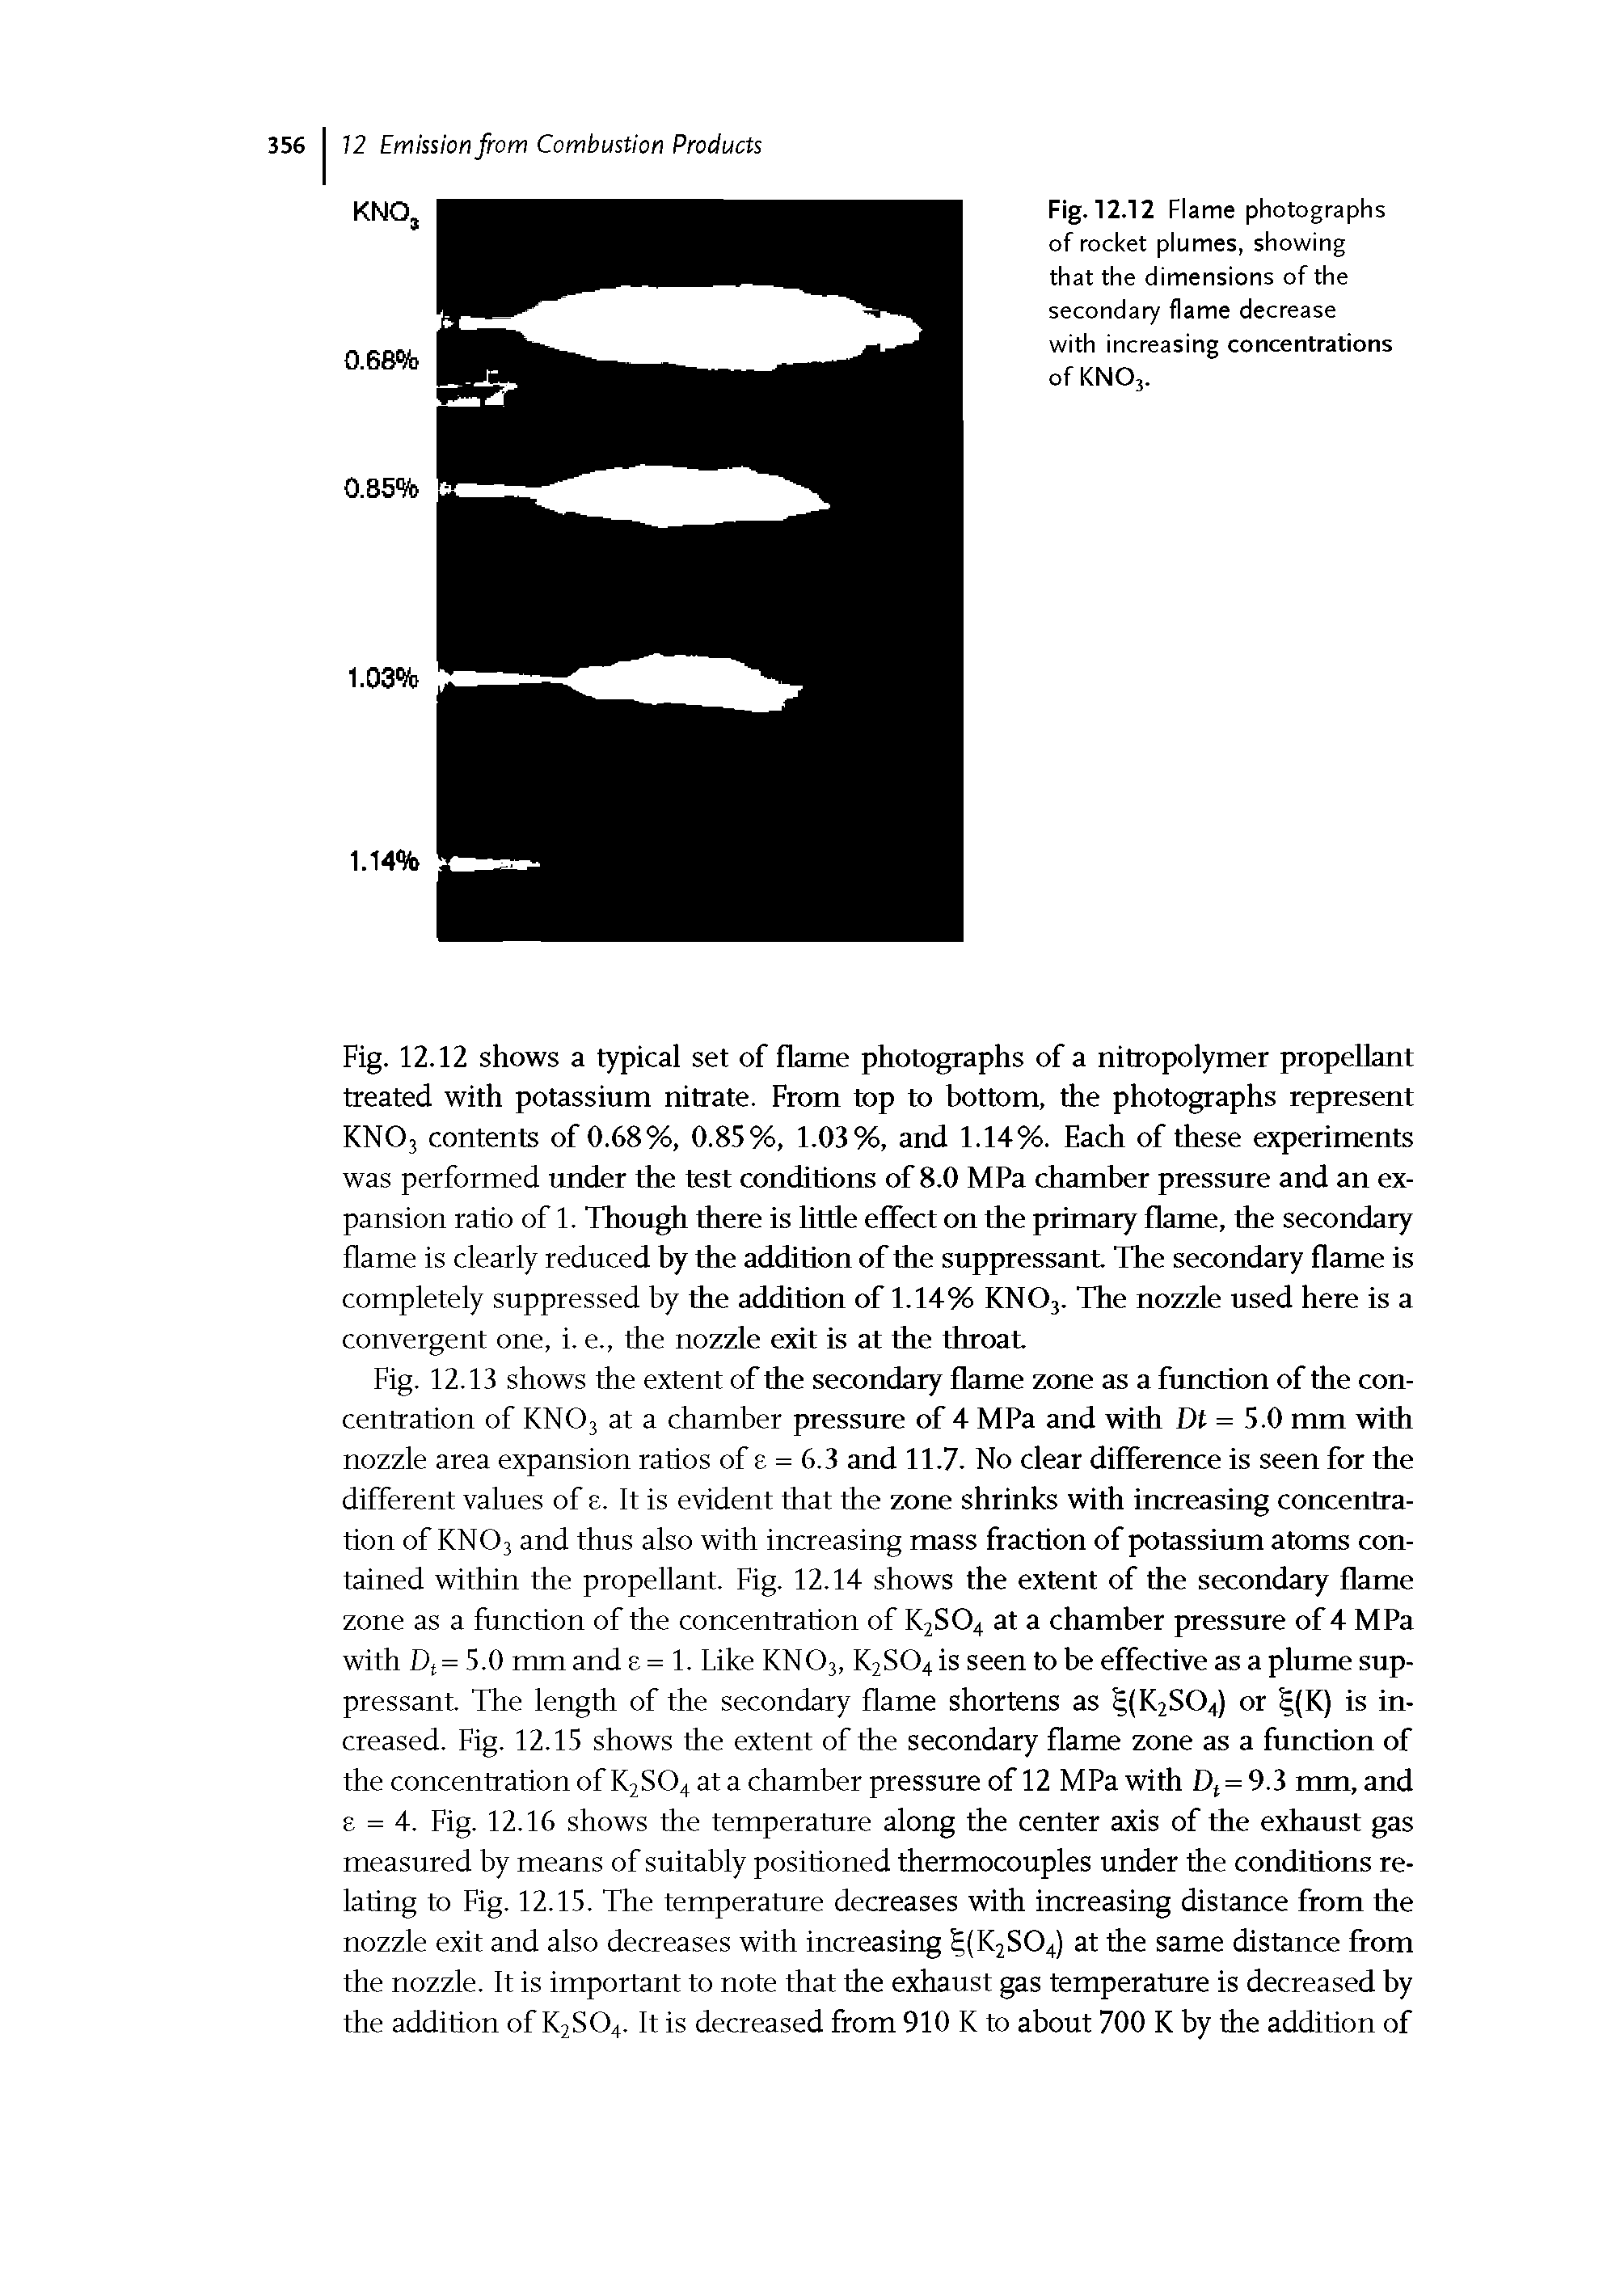 Fig. 12.12 Flame photographs of rocket plumes, showing that the dimensions of the secondary flame decrease with increasing concentrations of KNO,.